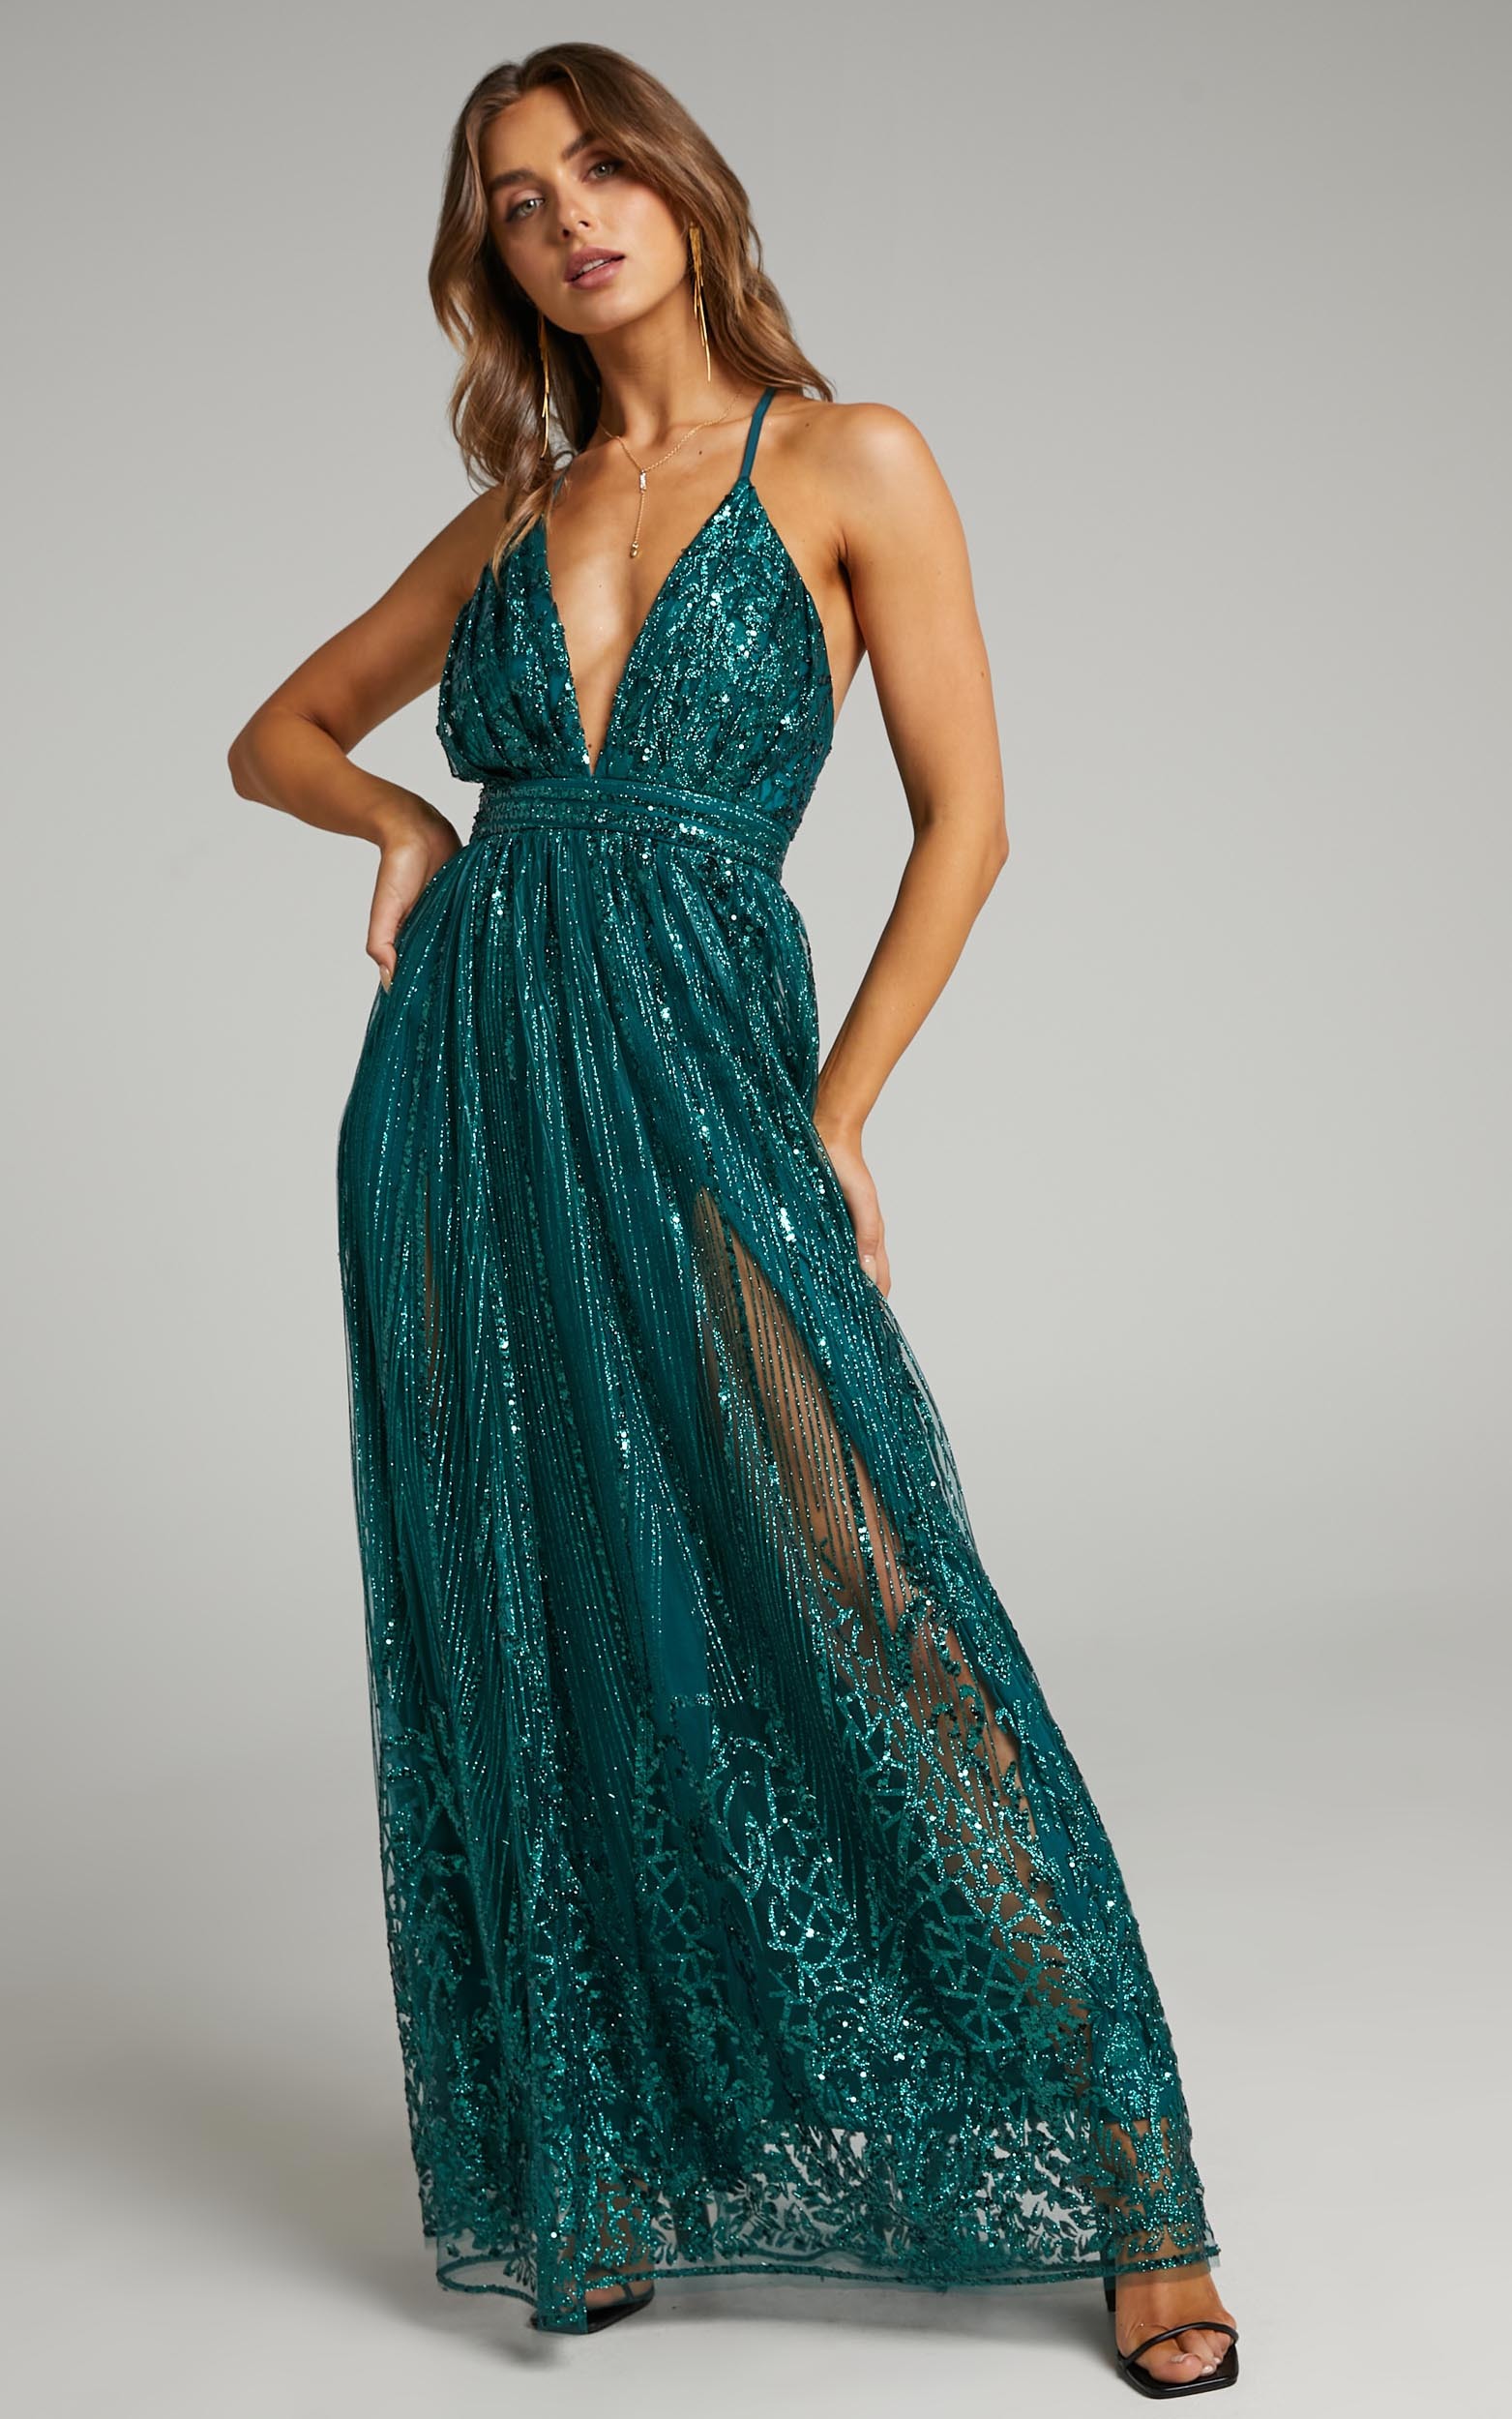 Paola Plunge Maxi Dress in Emerald - 04, GRN2, hi-res image number null